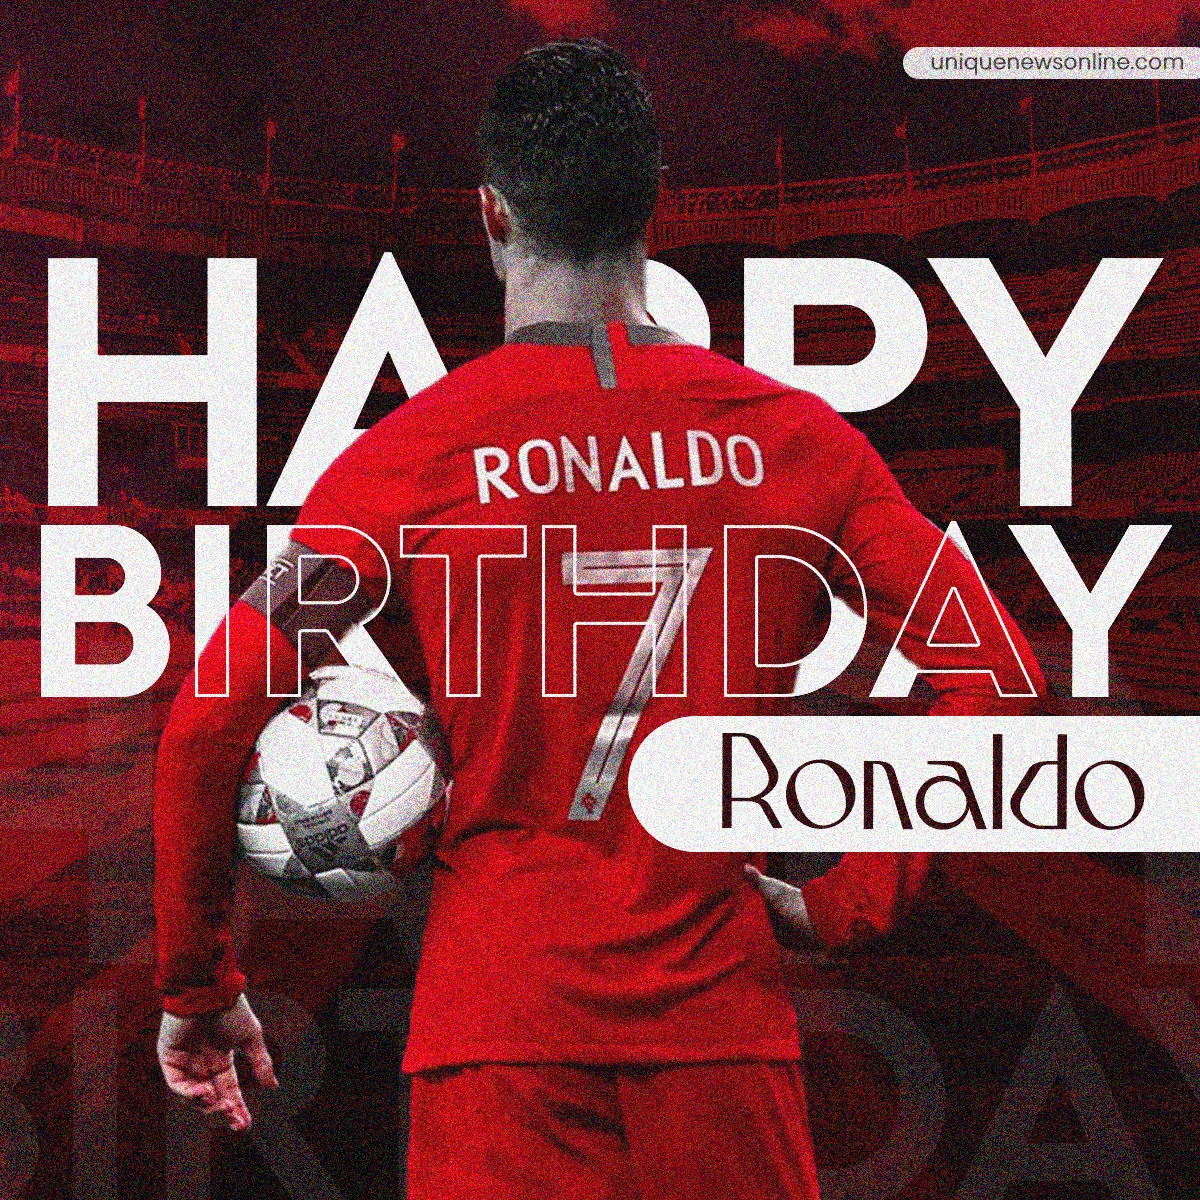 Happy Birthday Cristiano Ronaldo: Top Wishes, Quotes, Greetings Images, Messages, Posters, Banners, and WhatsApp Status Video to Download